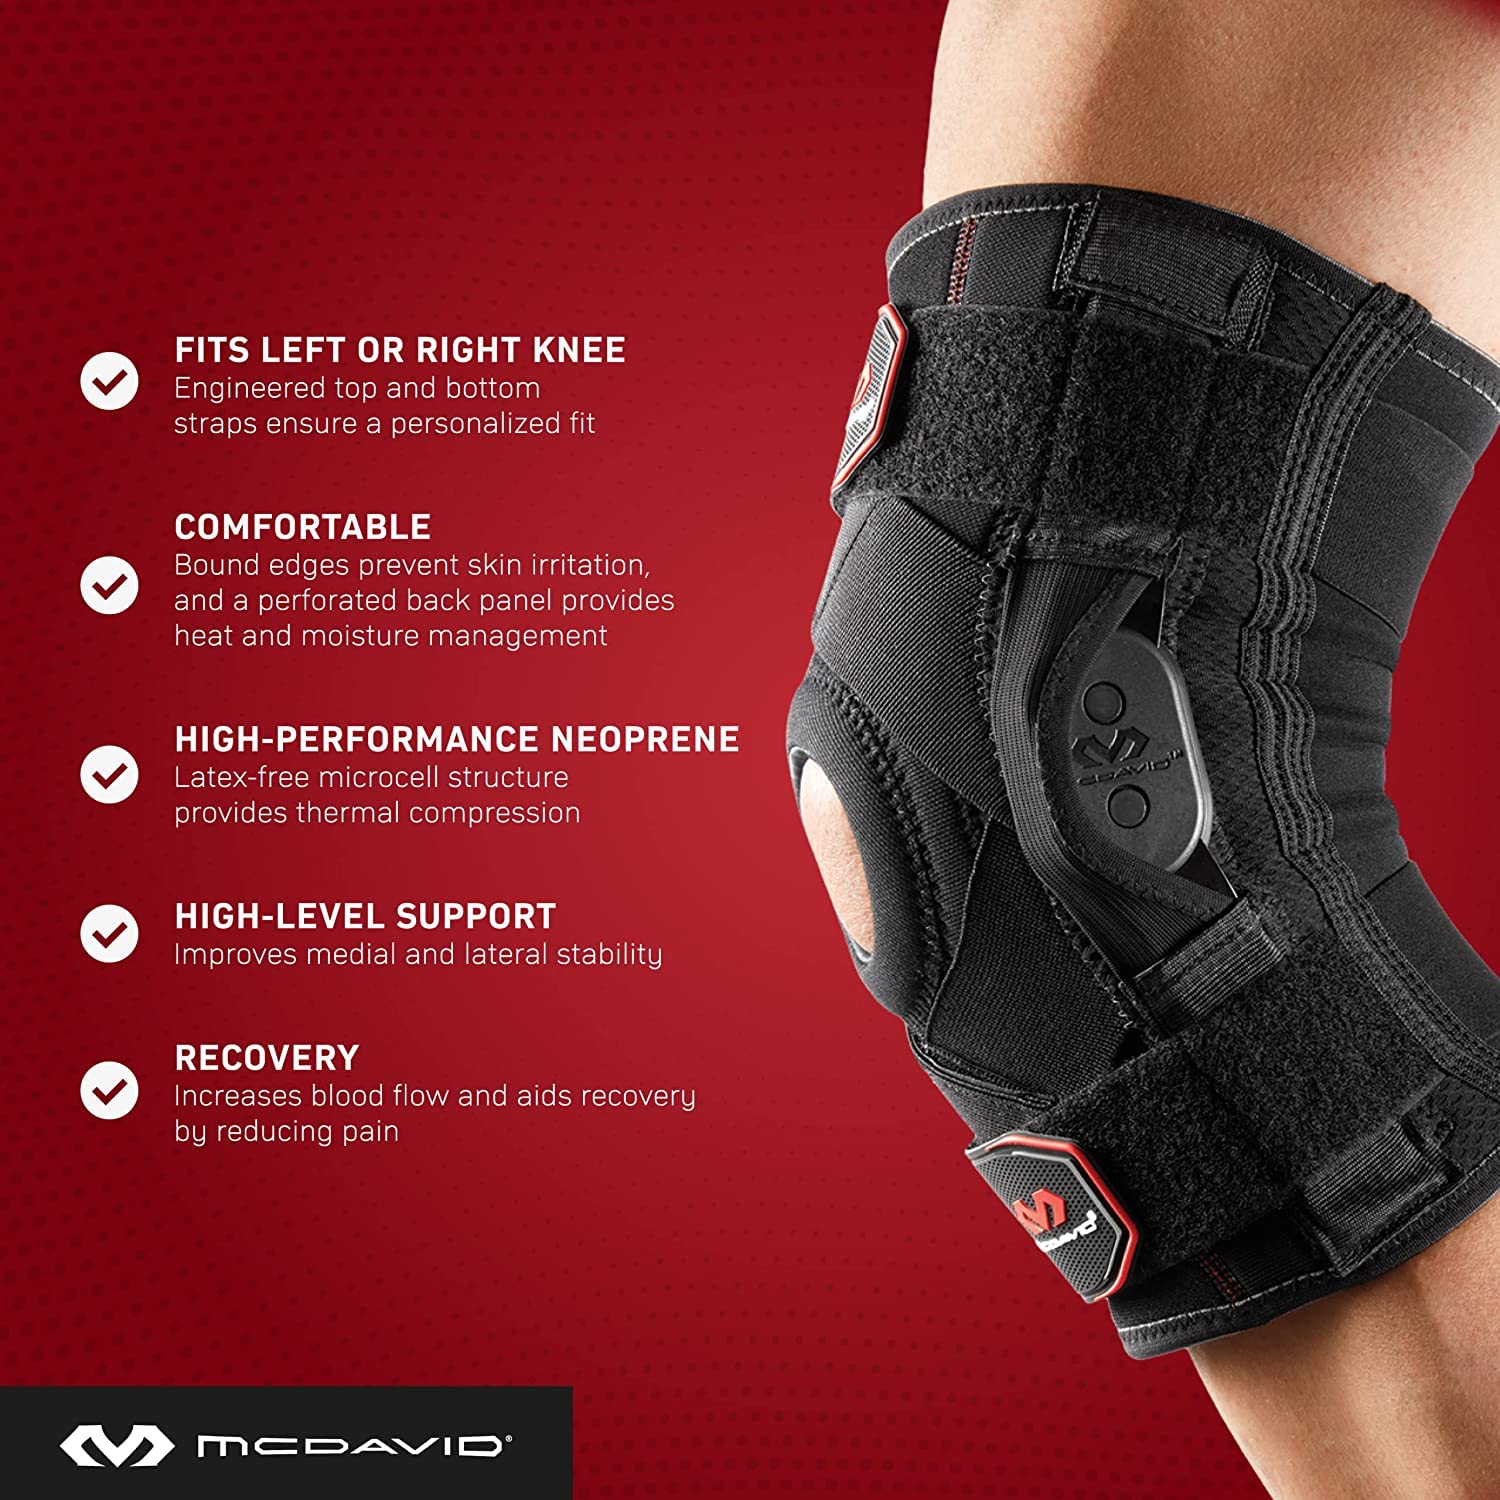 McDavid Maximum Support Knee Brace with Hinges (429X). Compression and Stability Straps for ACL, LCL, Arthritis, Tendonitis, MCL, Patella. Left and Right. Men and Women.